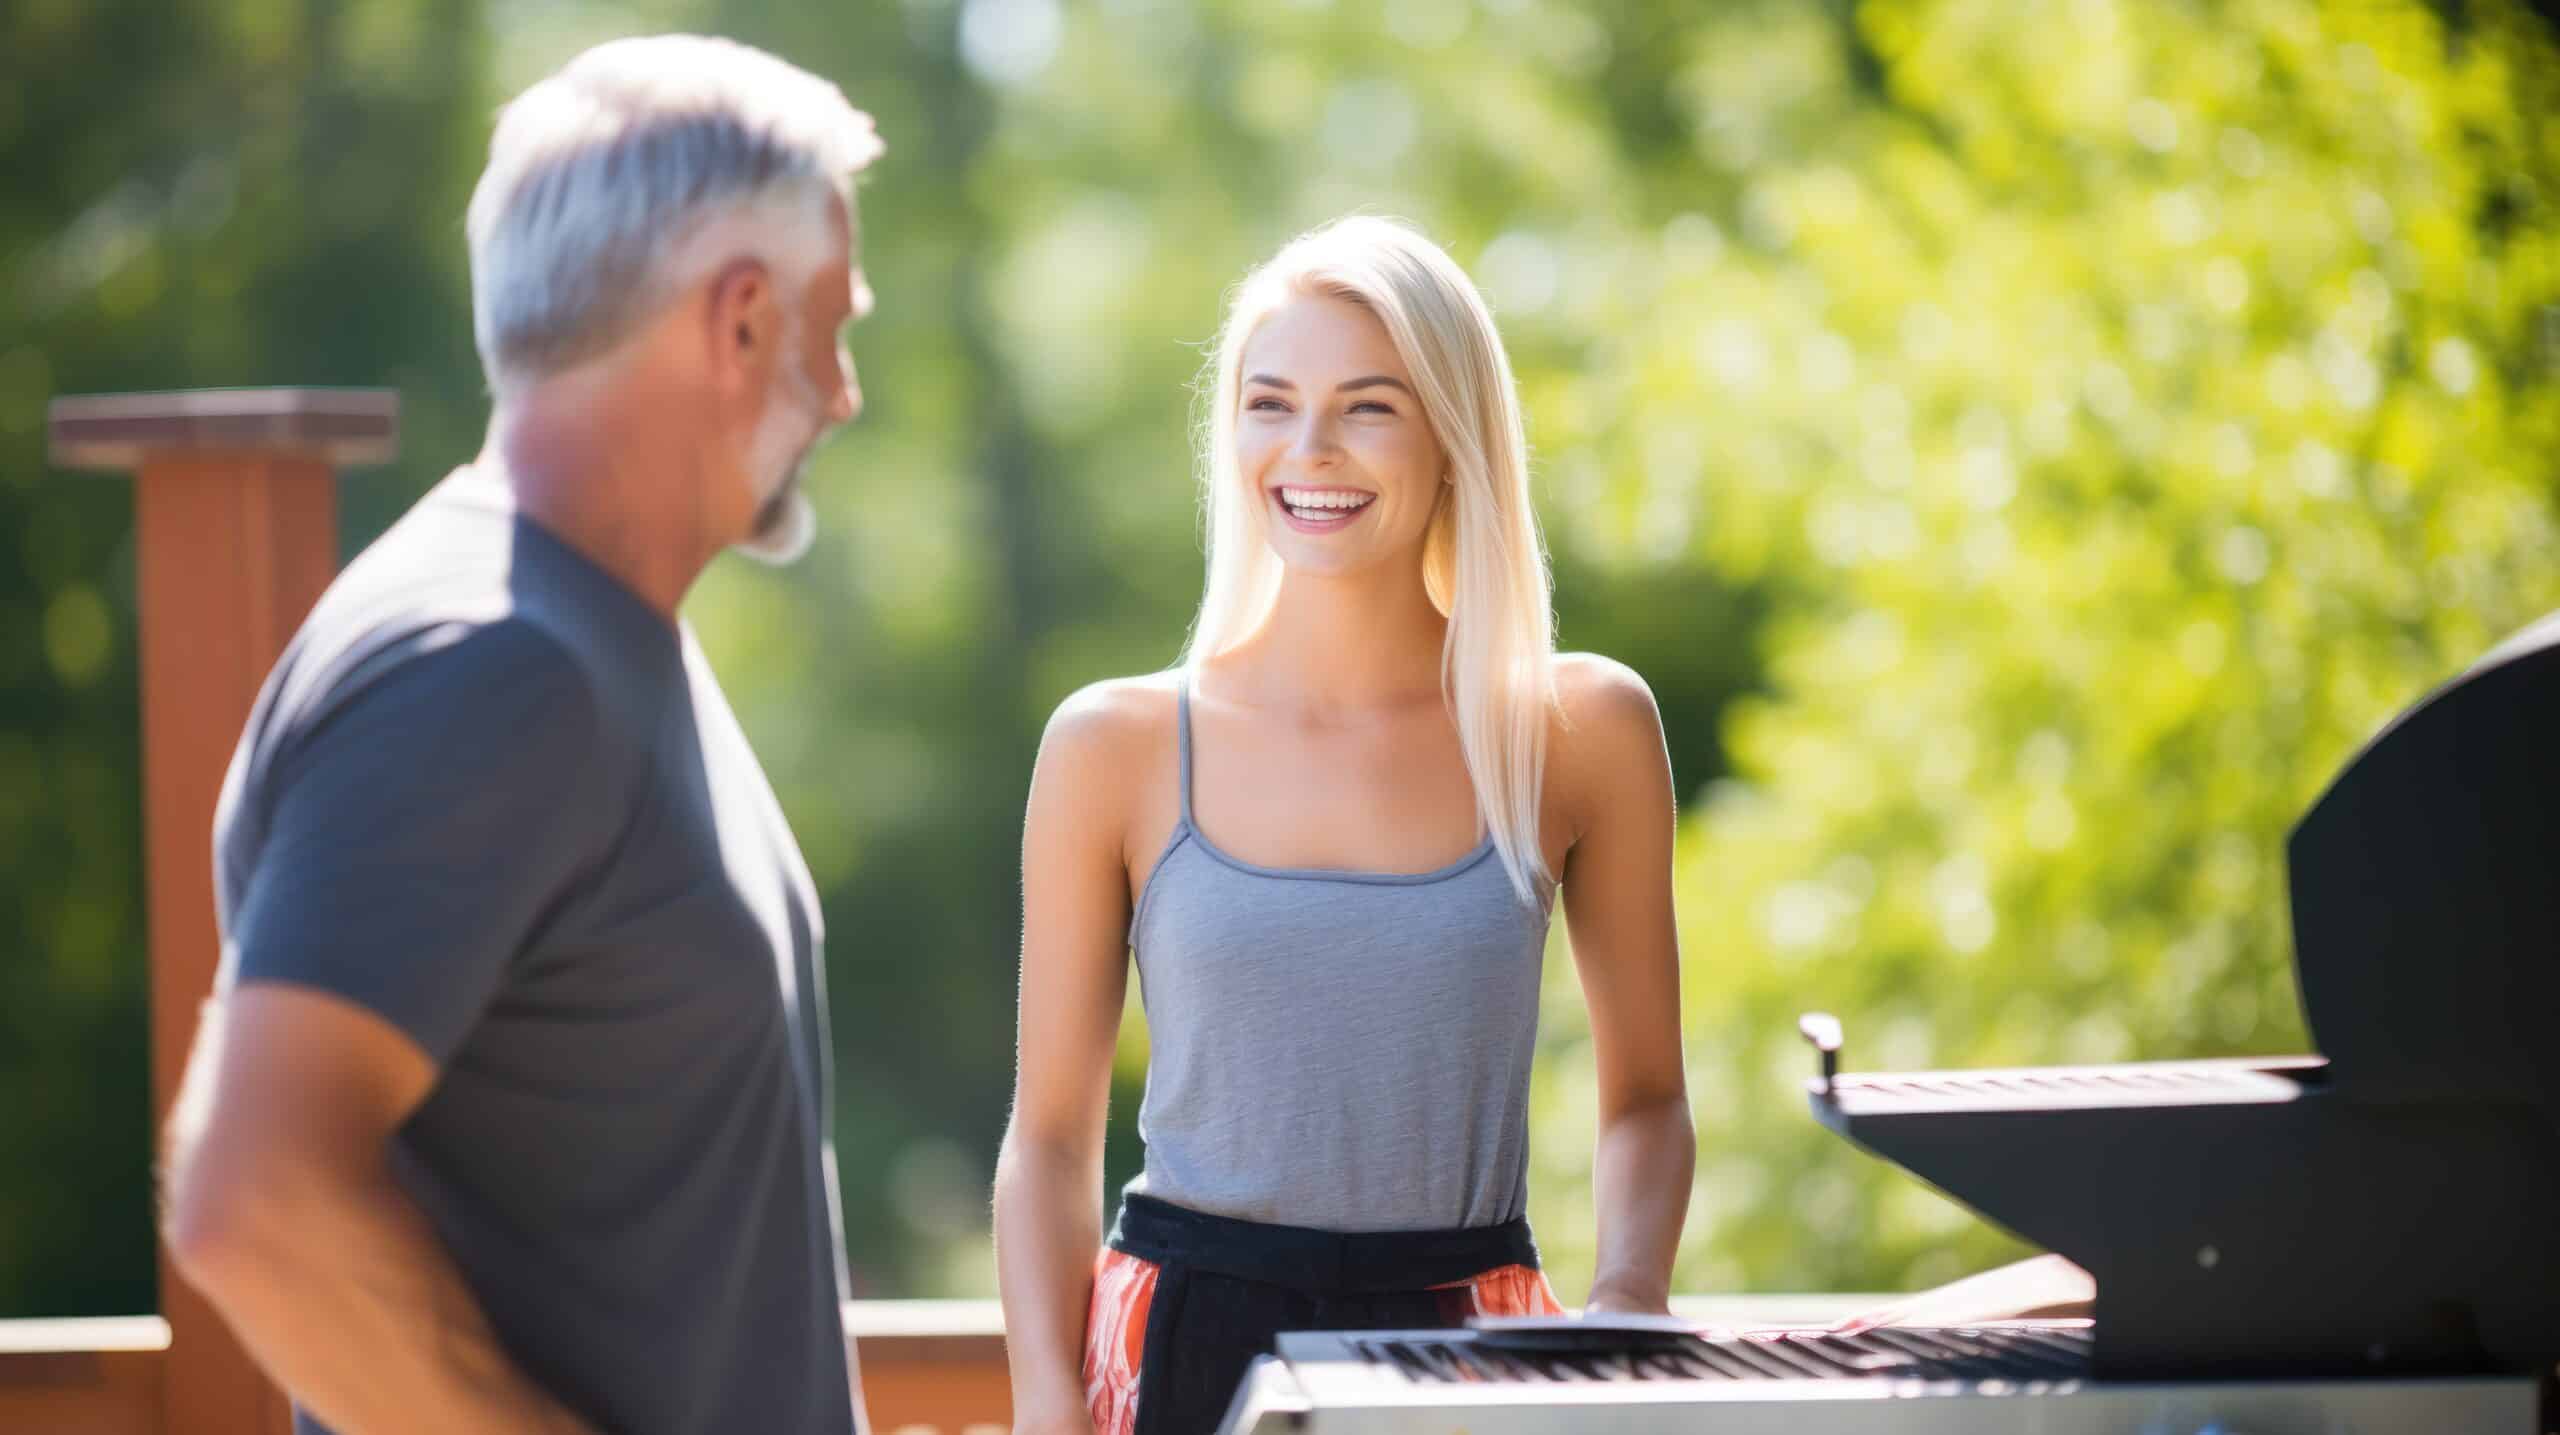 www.appr.com : How To Use Propane Gas Grill?